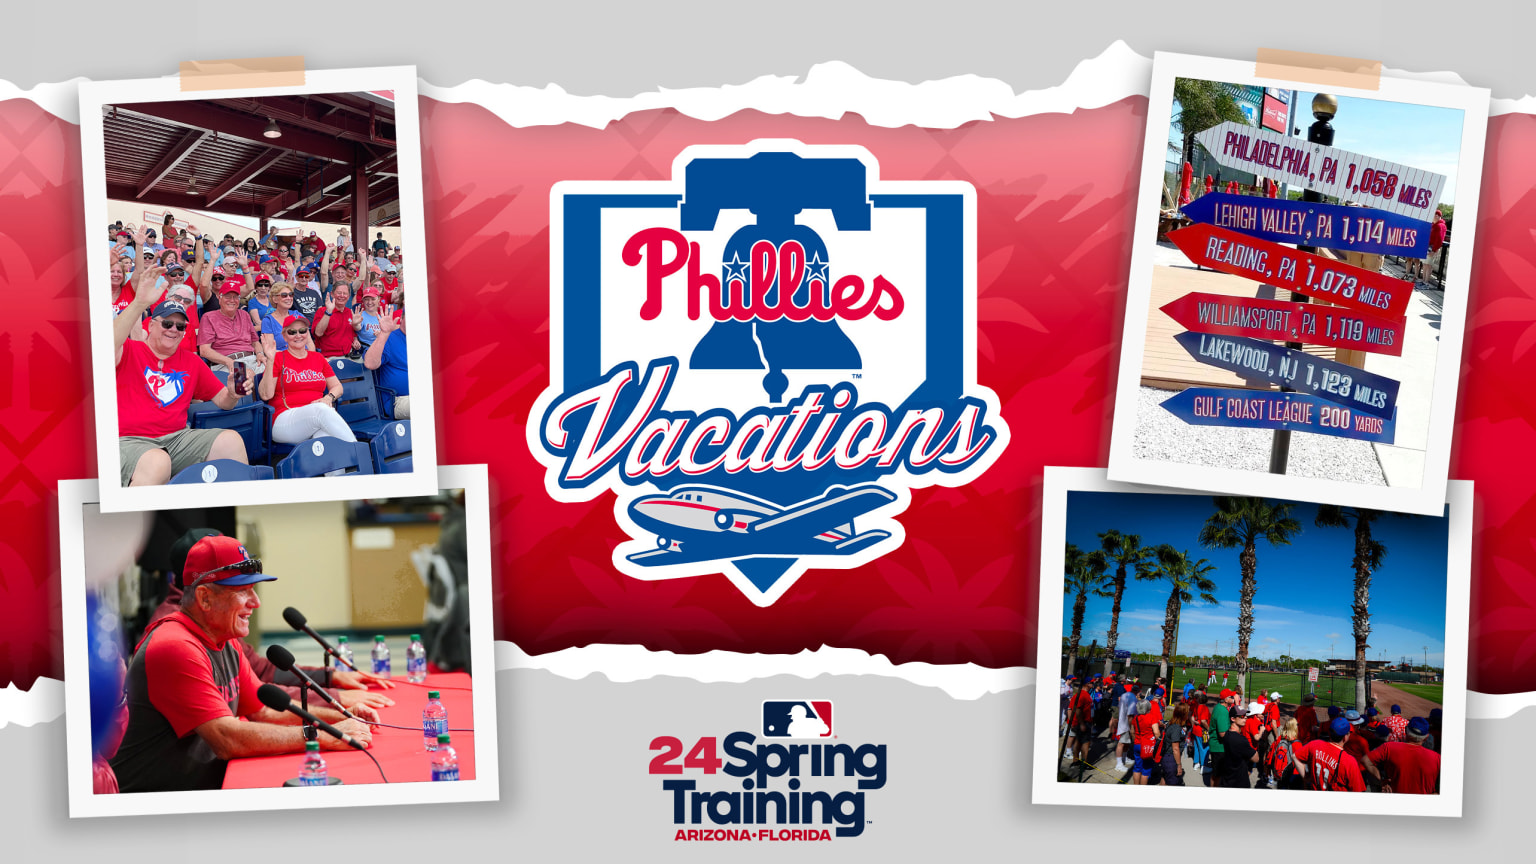 Phillies fans who booked trips to Clearwater for Spring Training frustrated  by MLB lockout